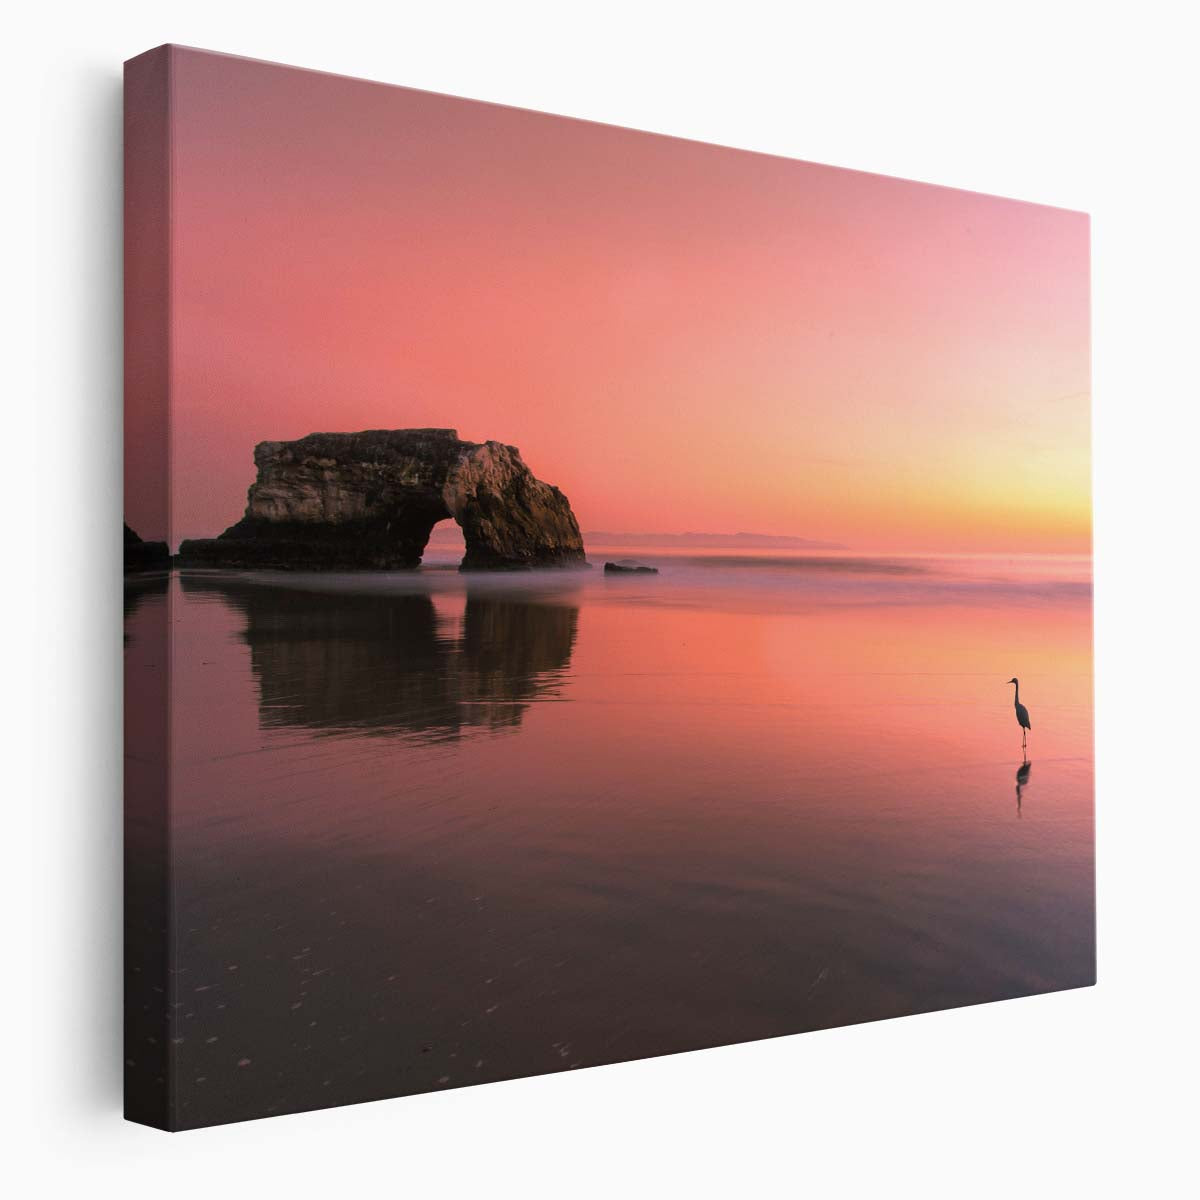 Serene Pink Sunset Seascape with Heron Wall Art by Luxuriance Designs. Made in USA.